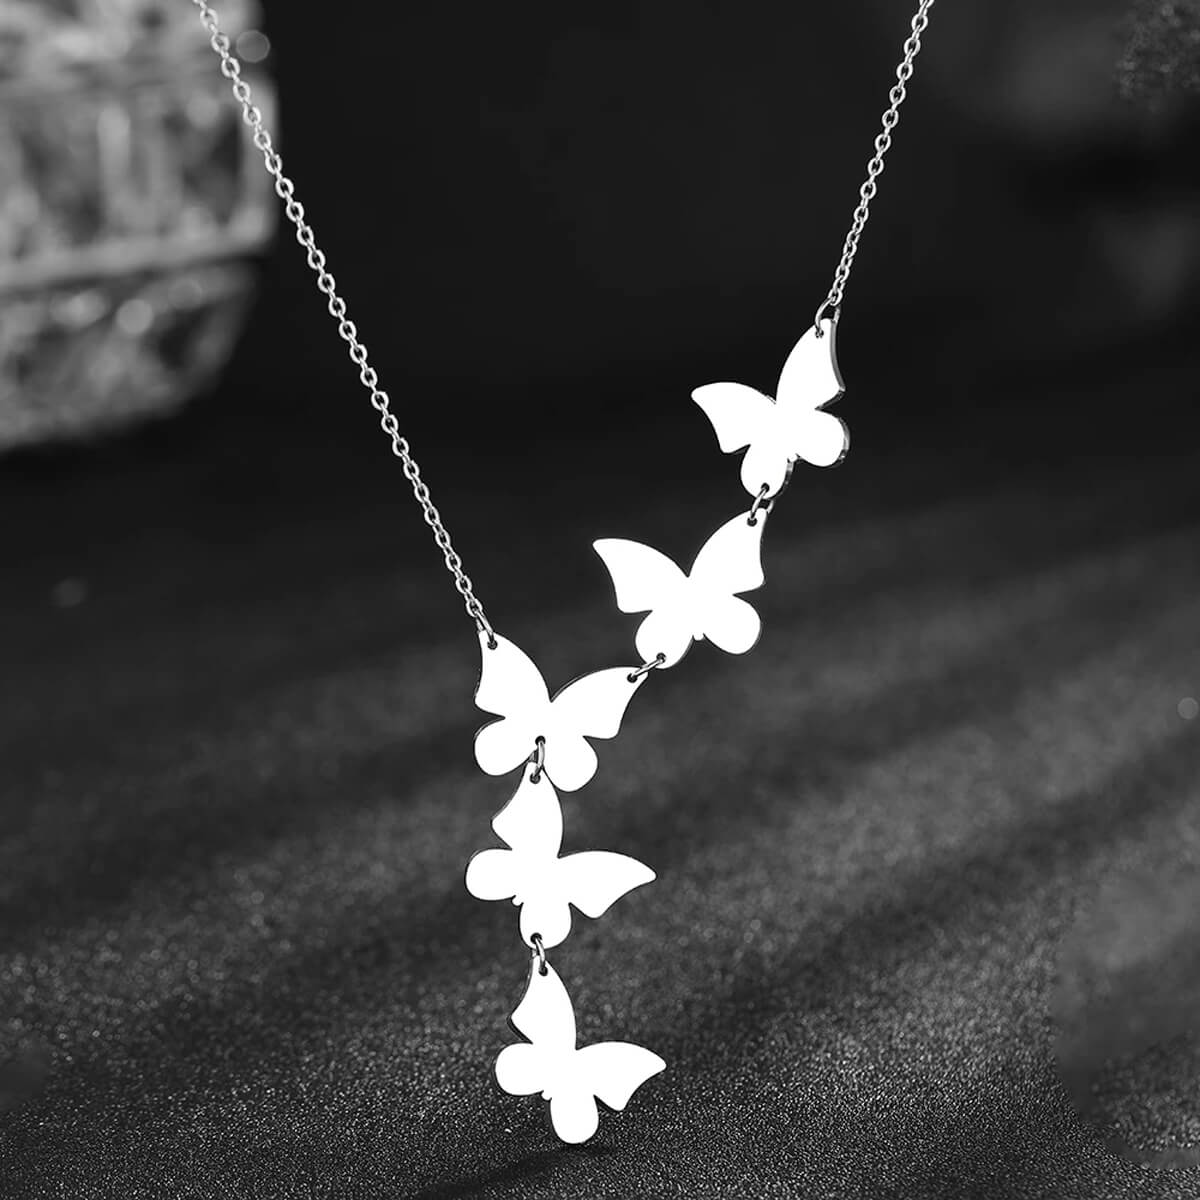 Butterflies In The Sky Necklace Stainless Steel Jewelry